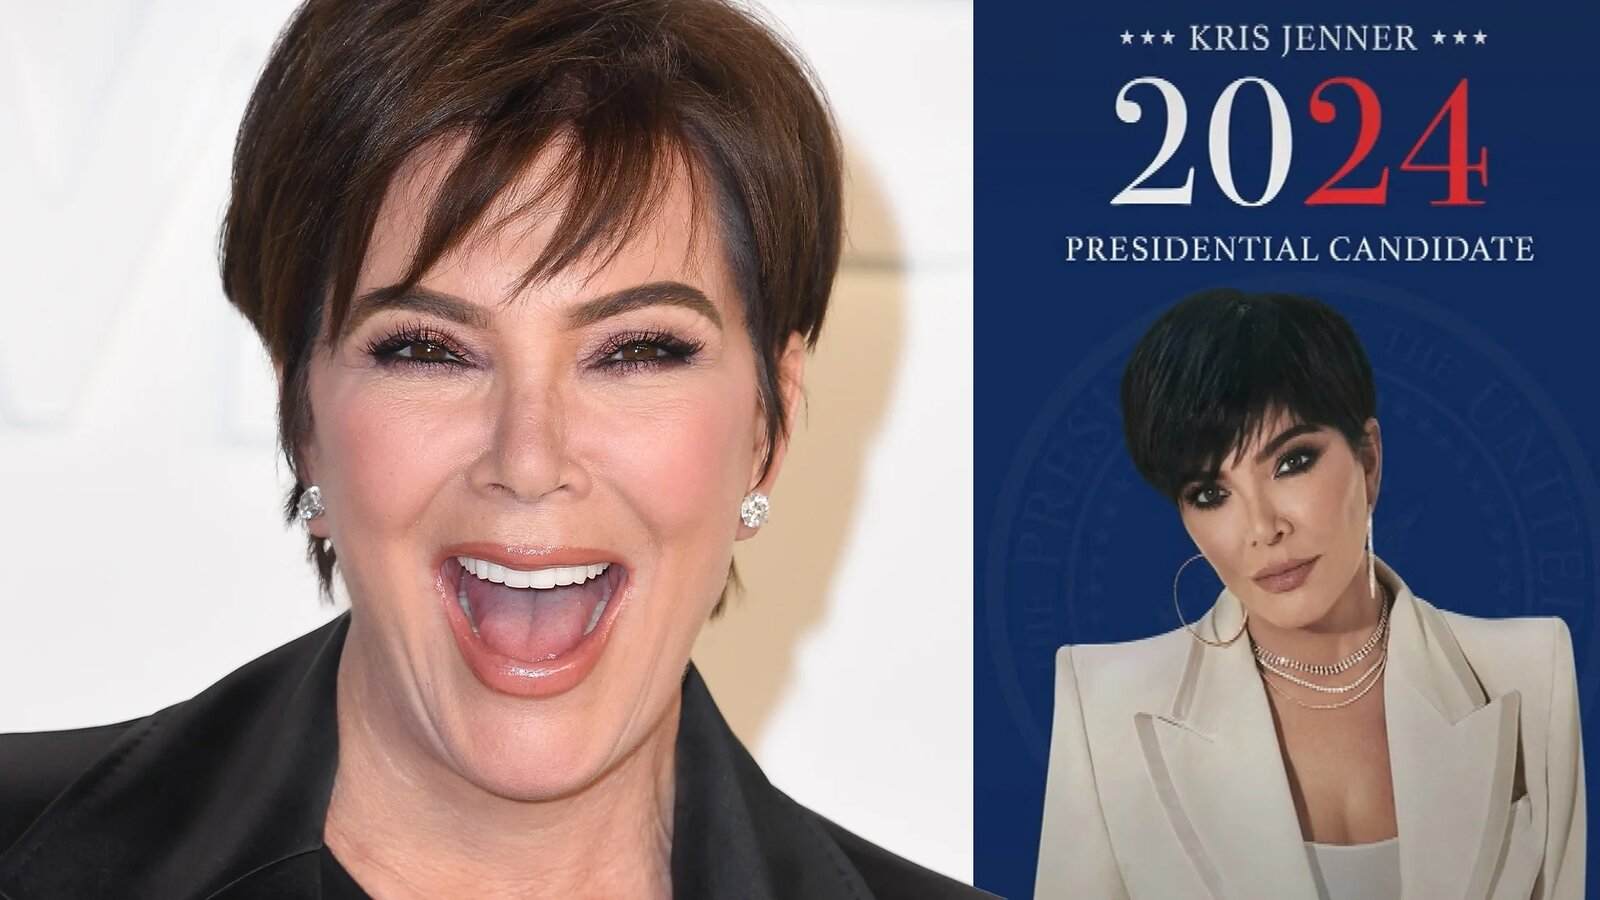 Will Kris Jenner Run For President In 2024? Here’s What We Know